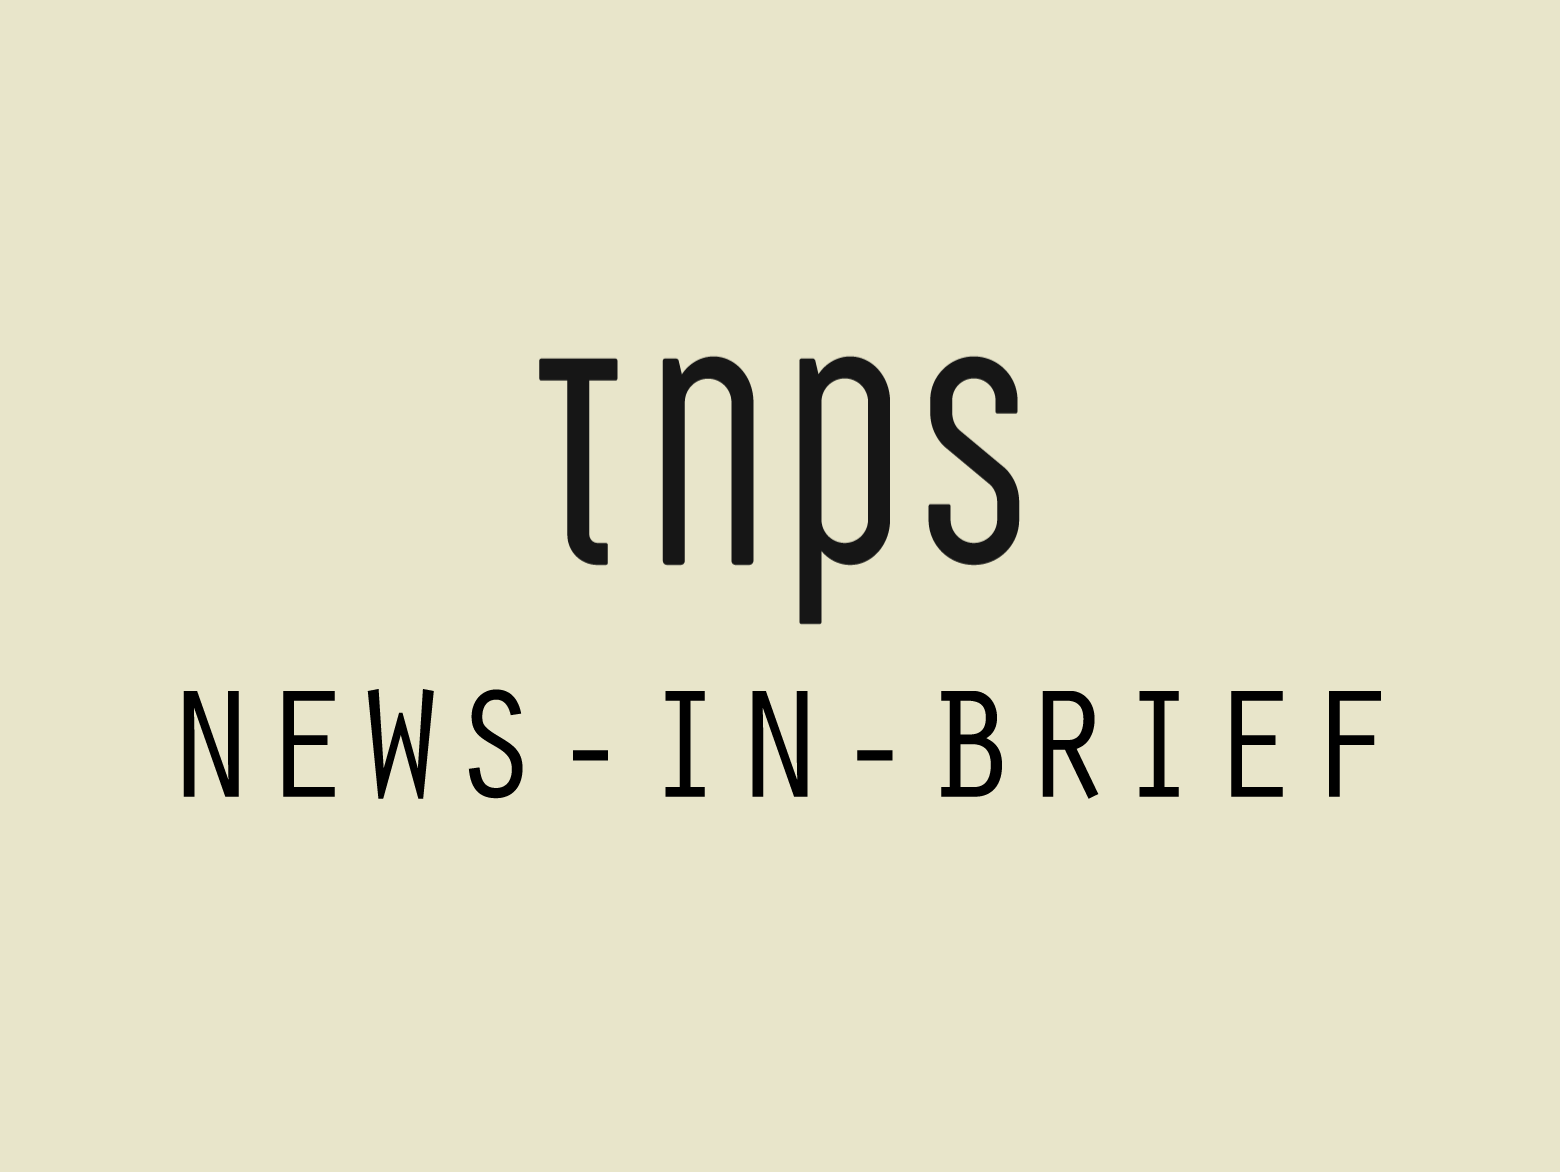 In case you missed it – The past week on TNPS